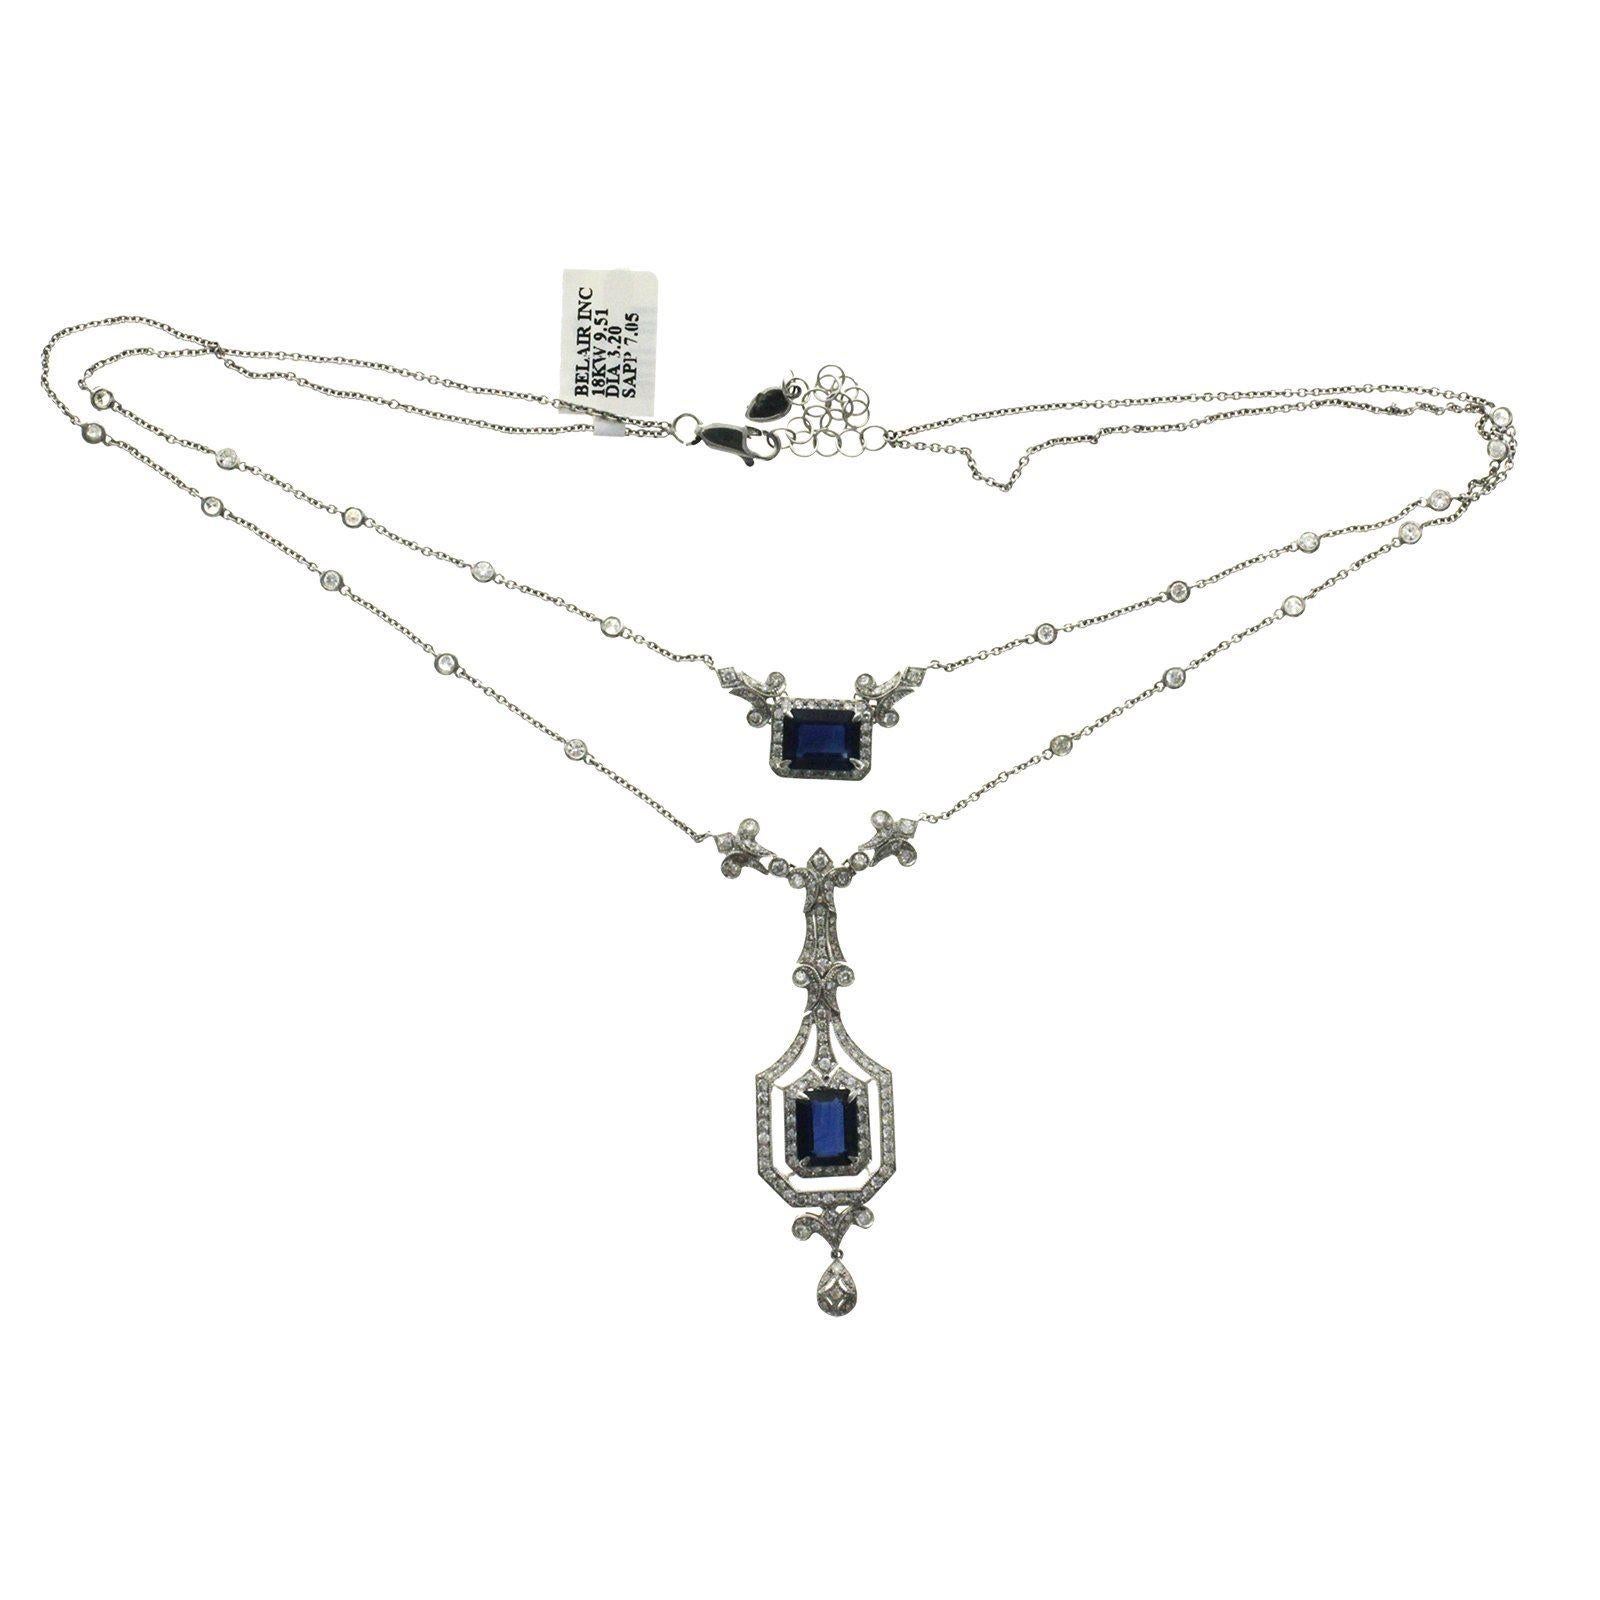 3.20 Carat Diamonds 7.05 Carat Blue Sapphire 18 Karat White Gold Drop Necklace In New Condition For Sale In Los Angeles, CA